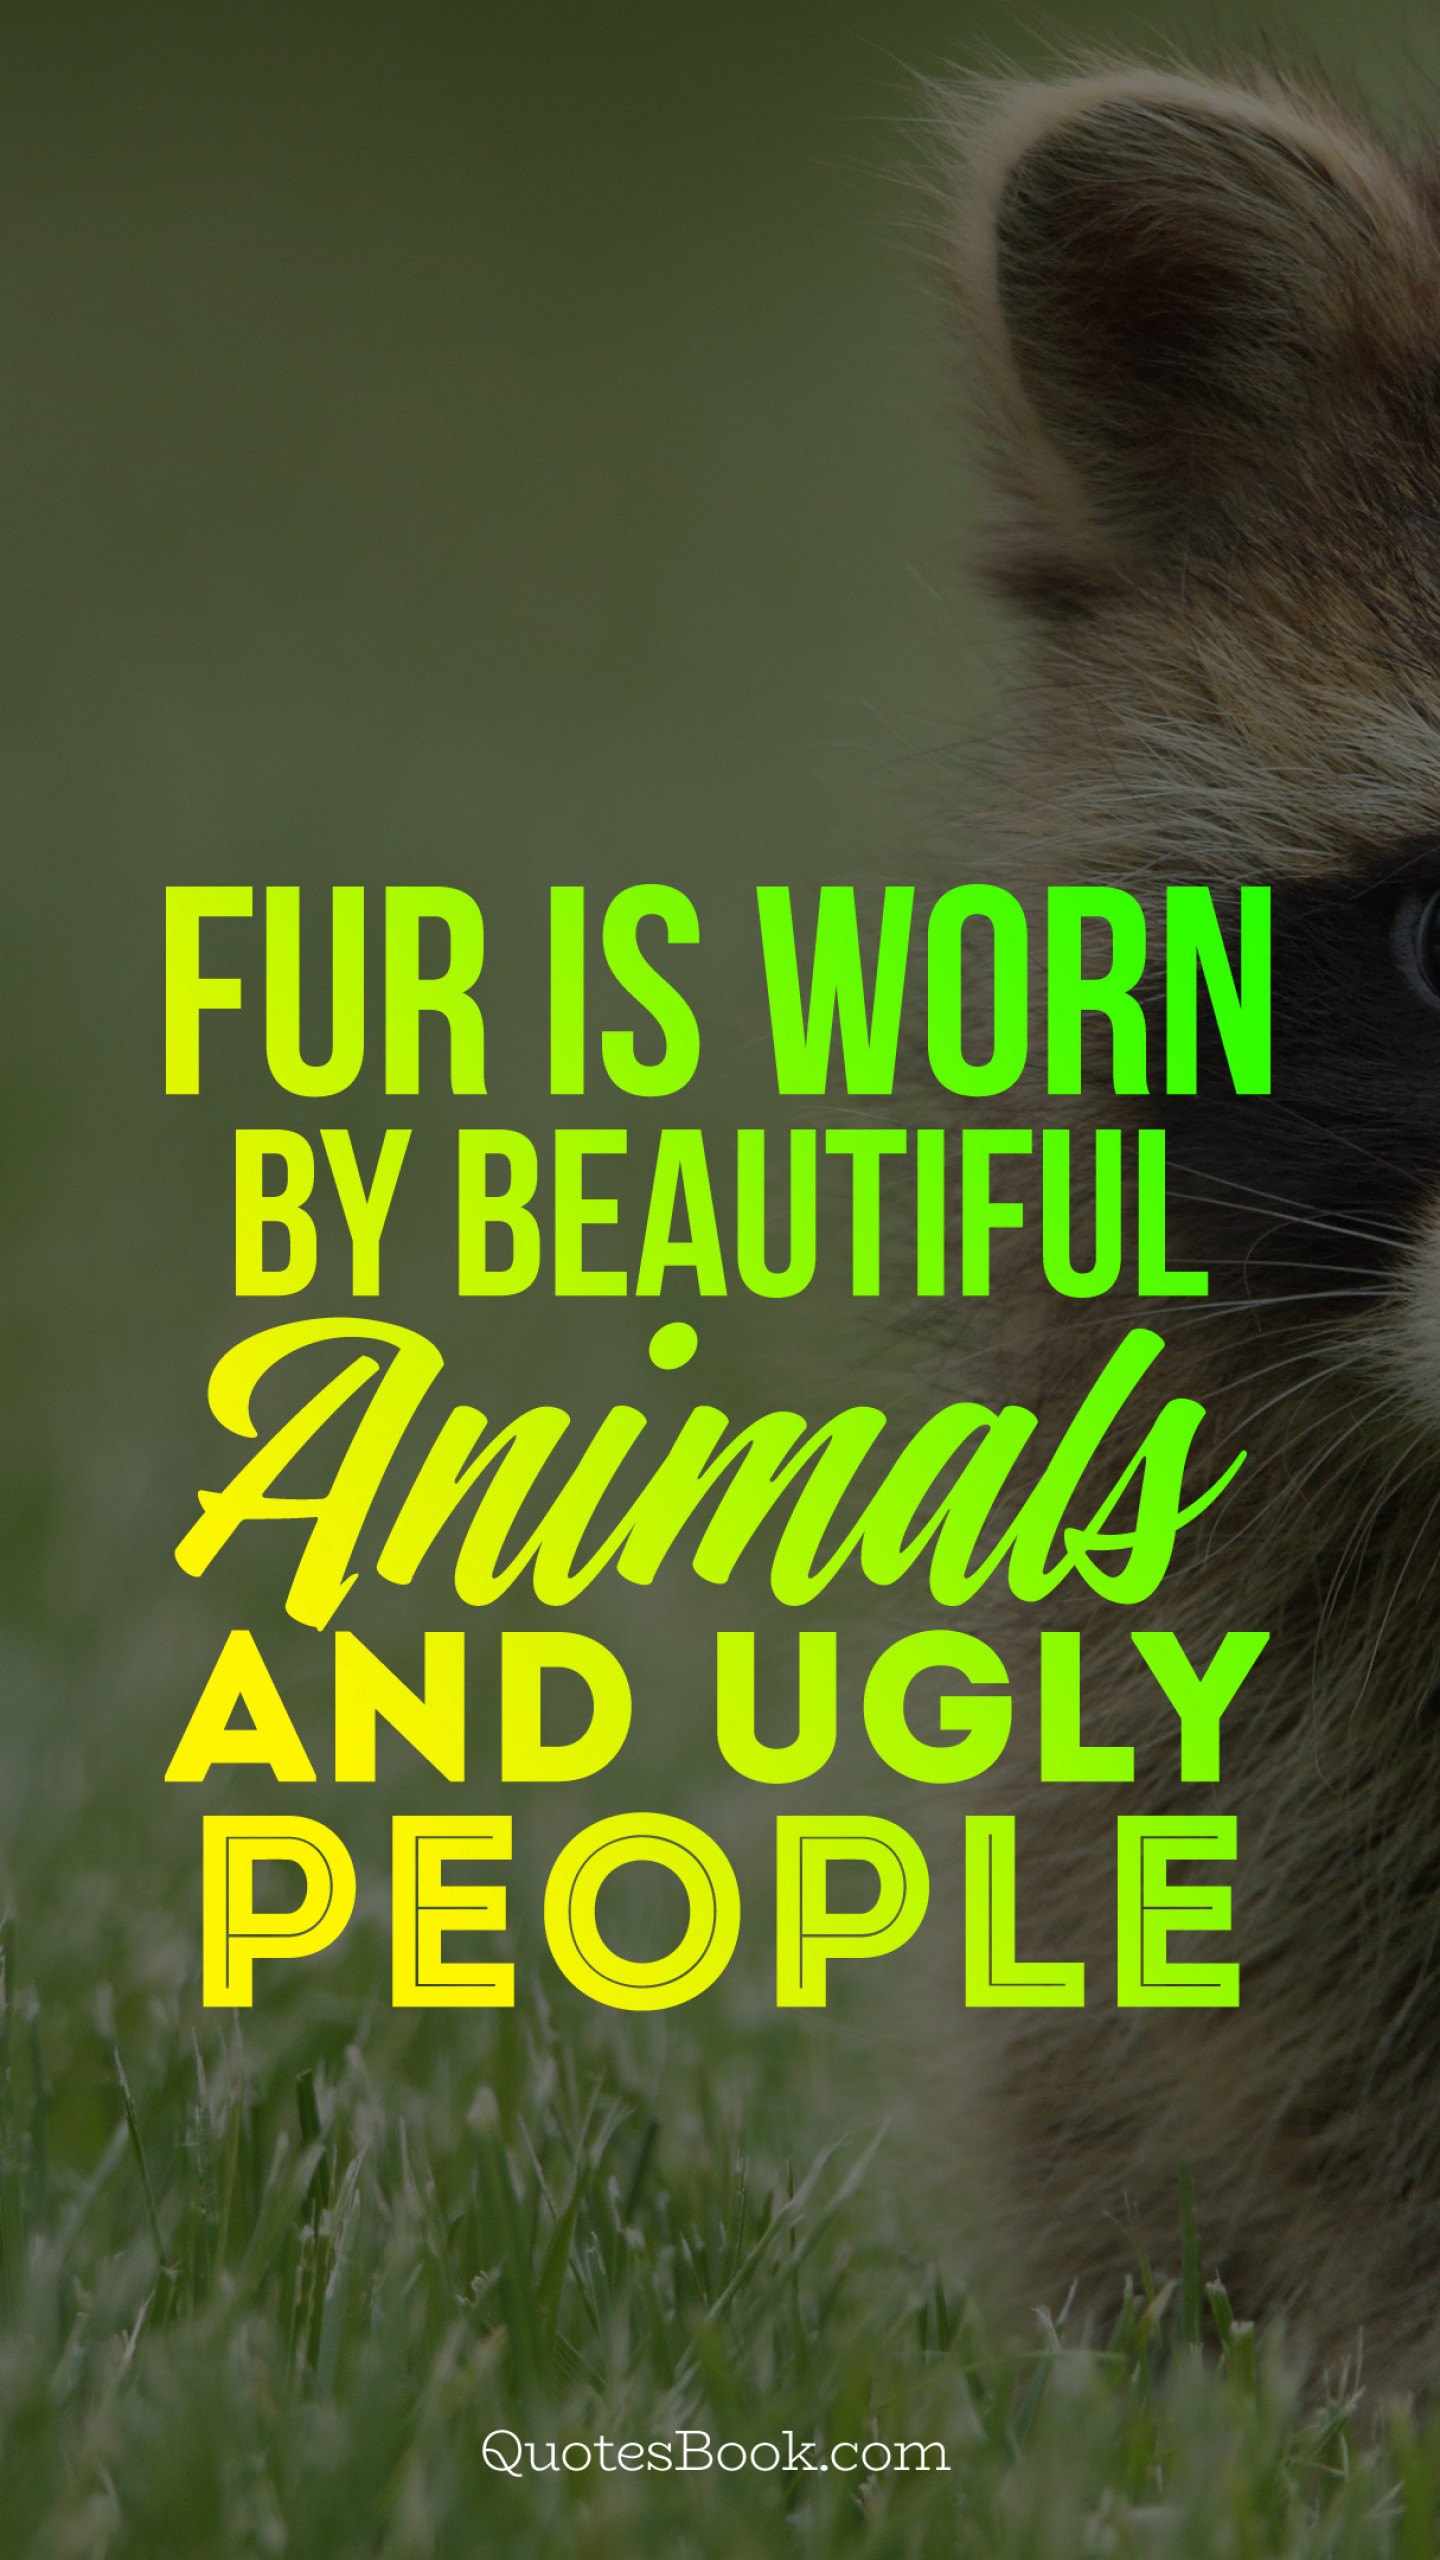 Fur is worn by beautiful animals and ugly people - QuotesBook